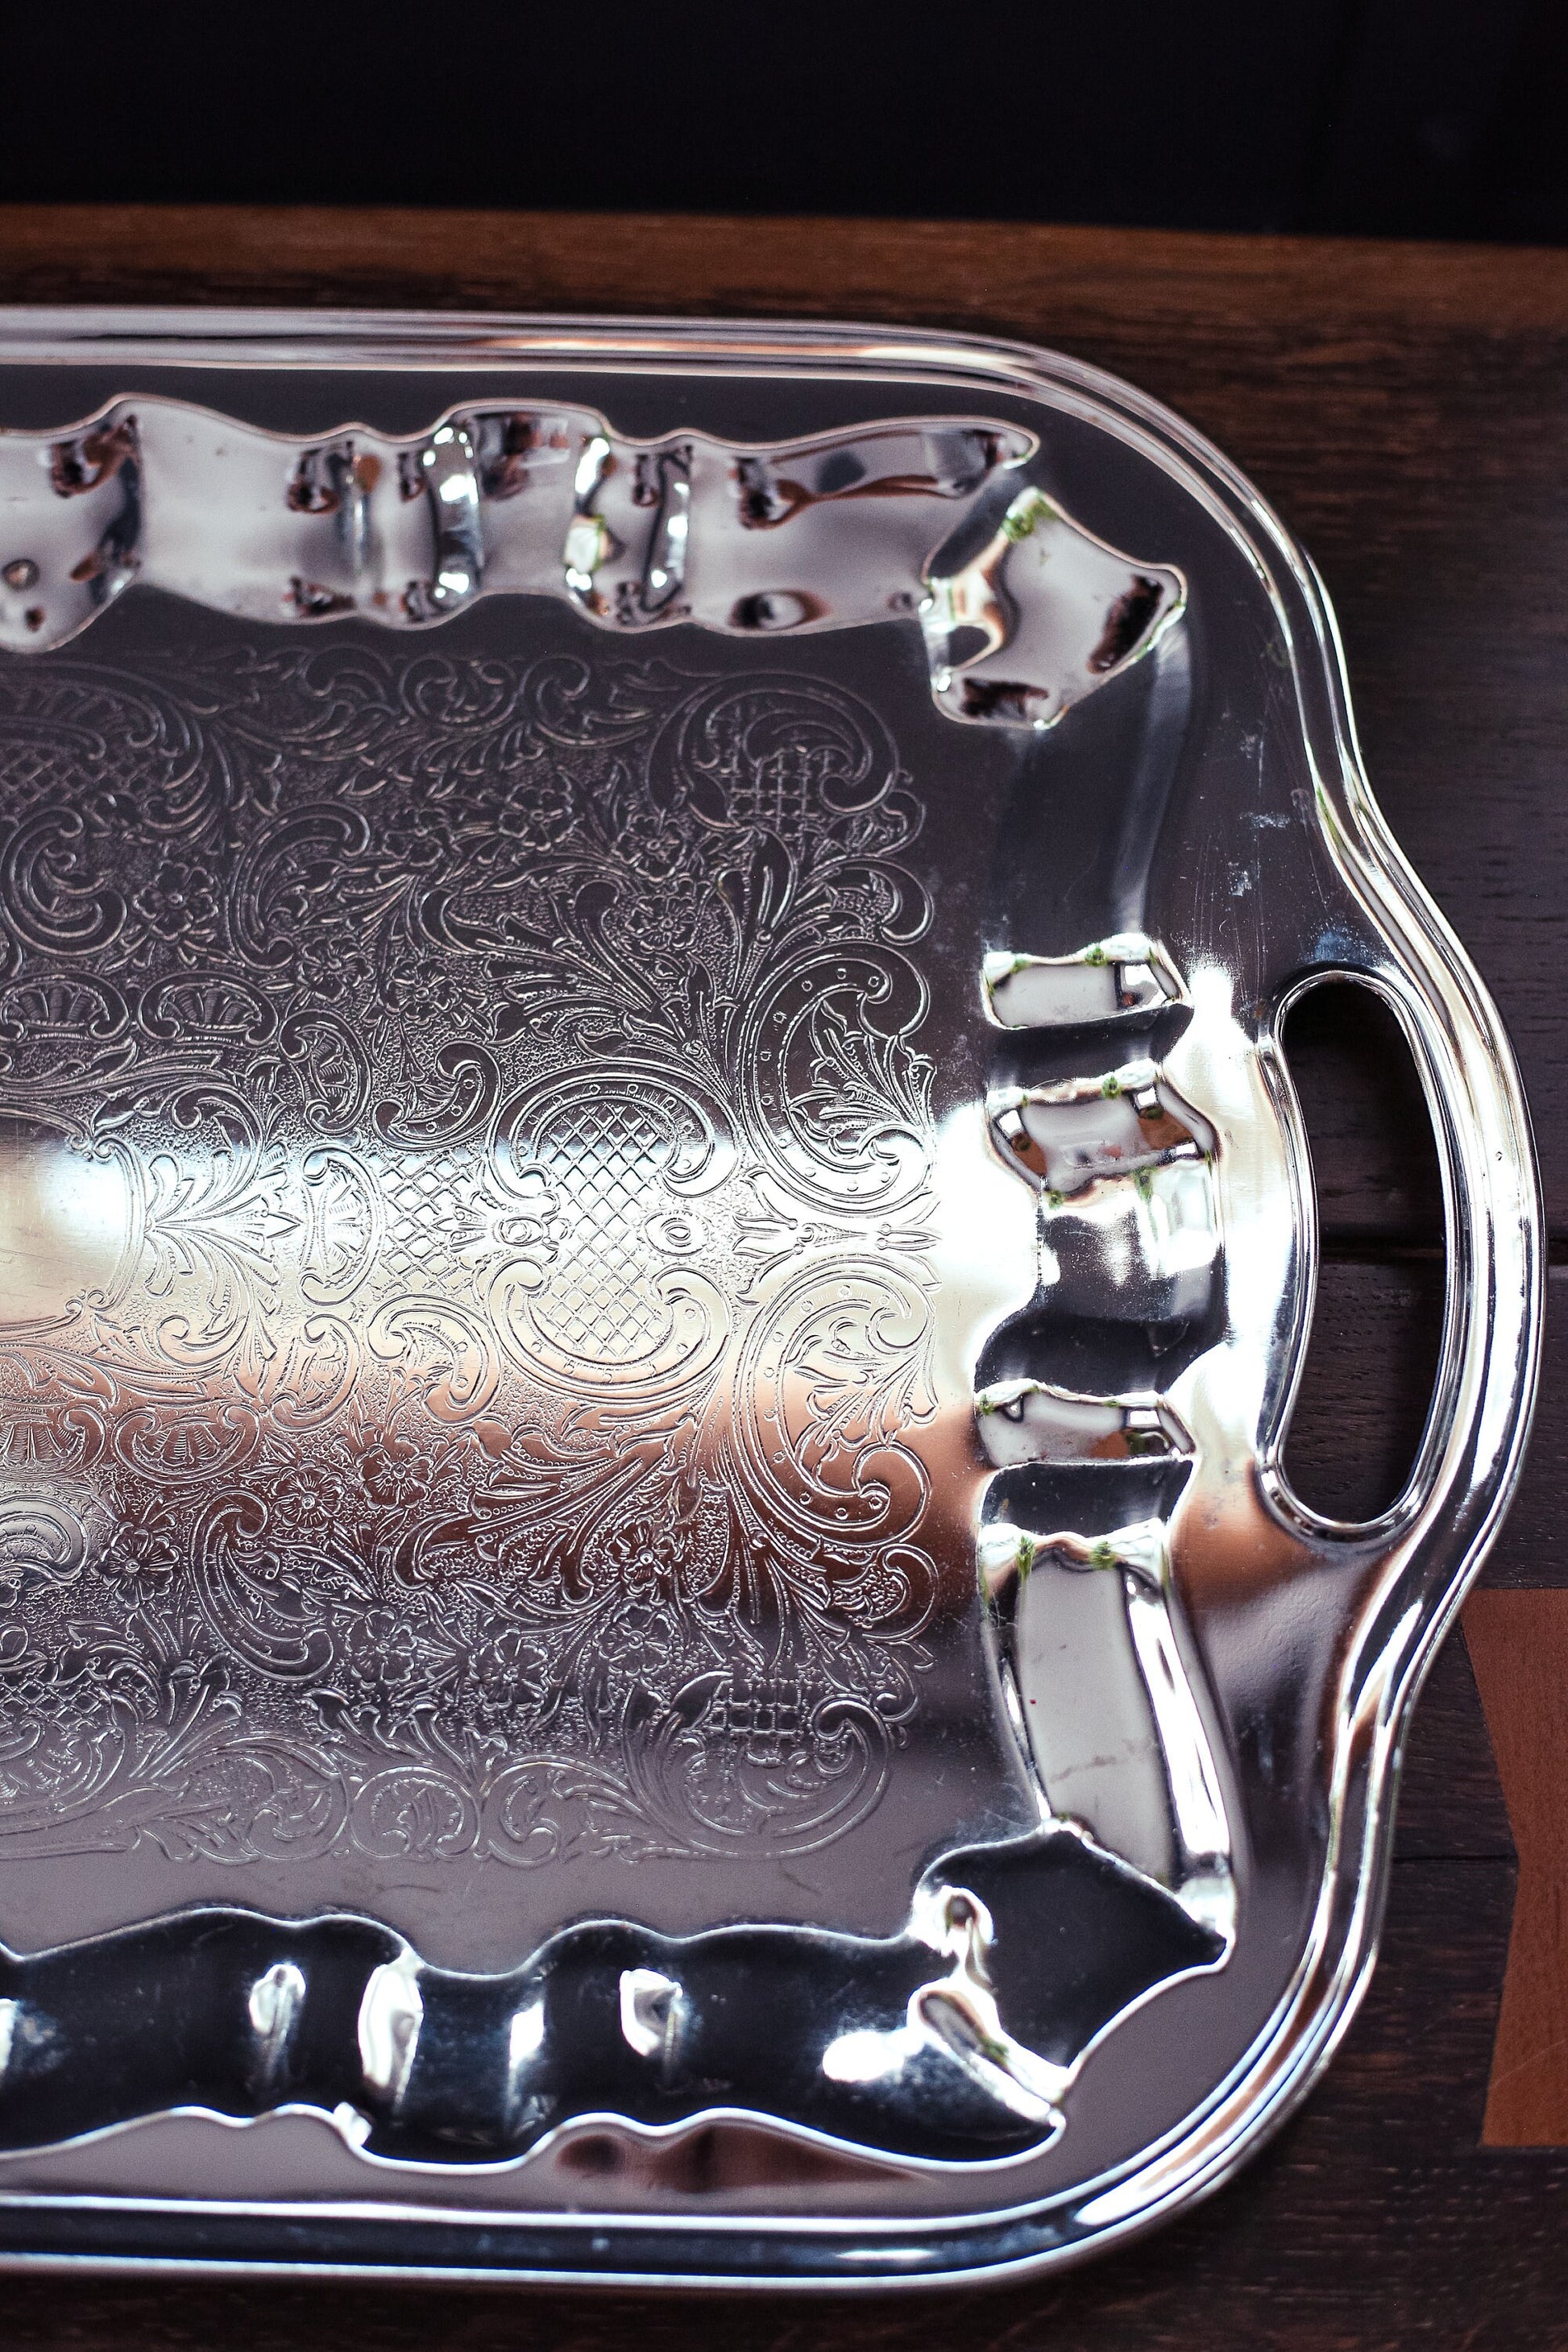 Vintage Chrome Serving Tray with Handles - Hellerware Etched Metal Tray